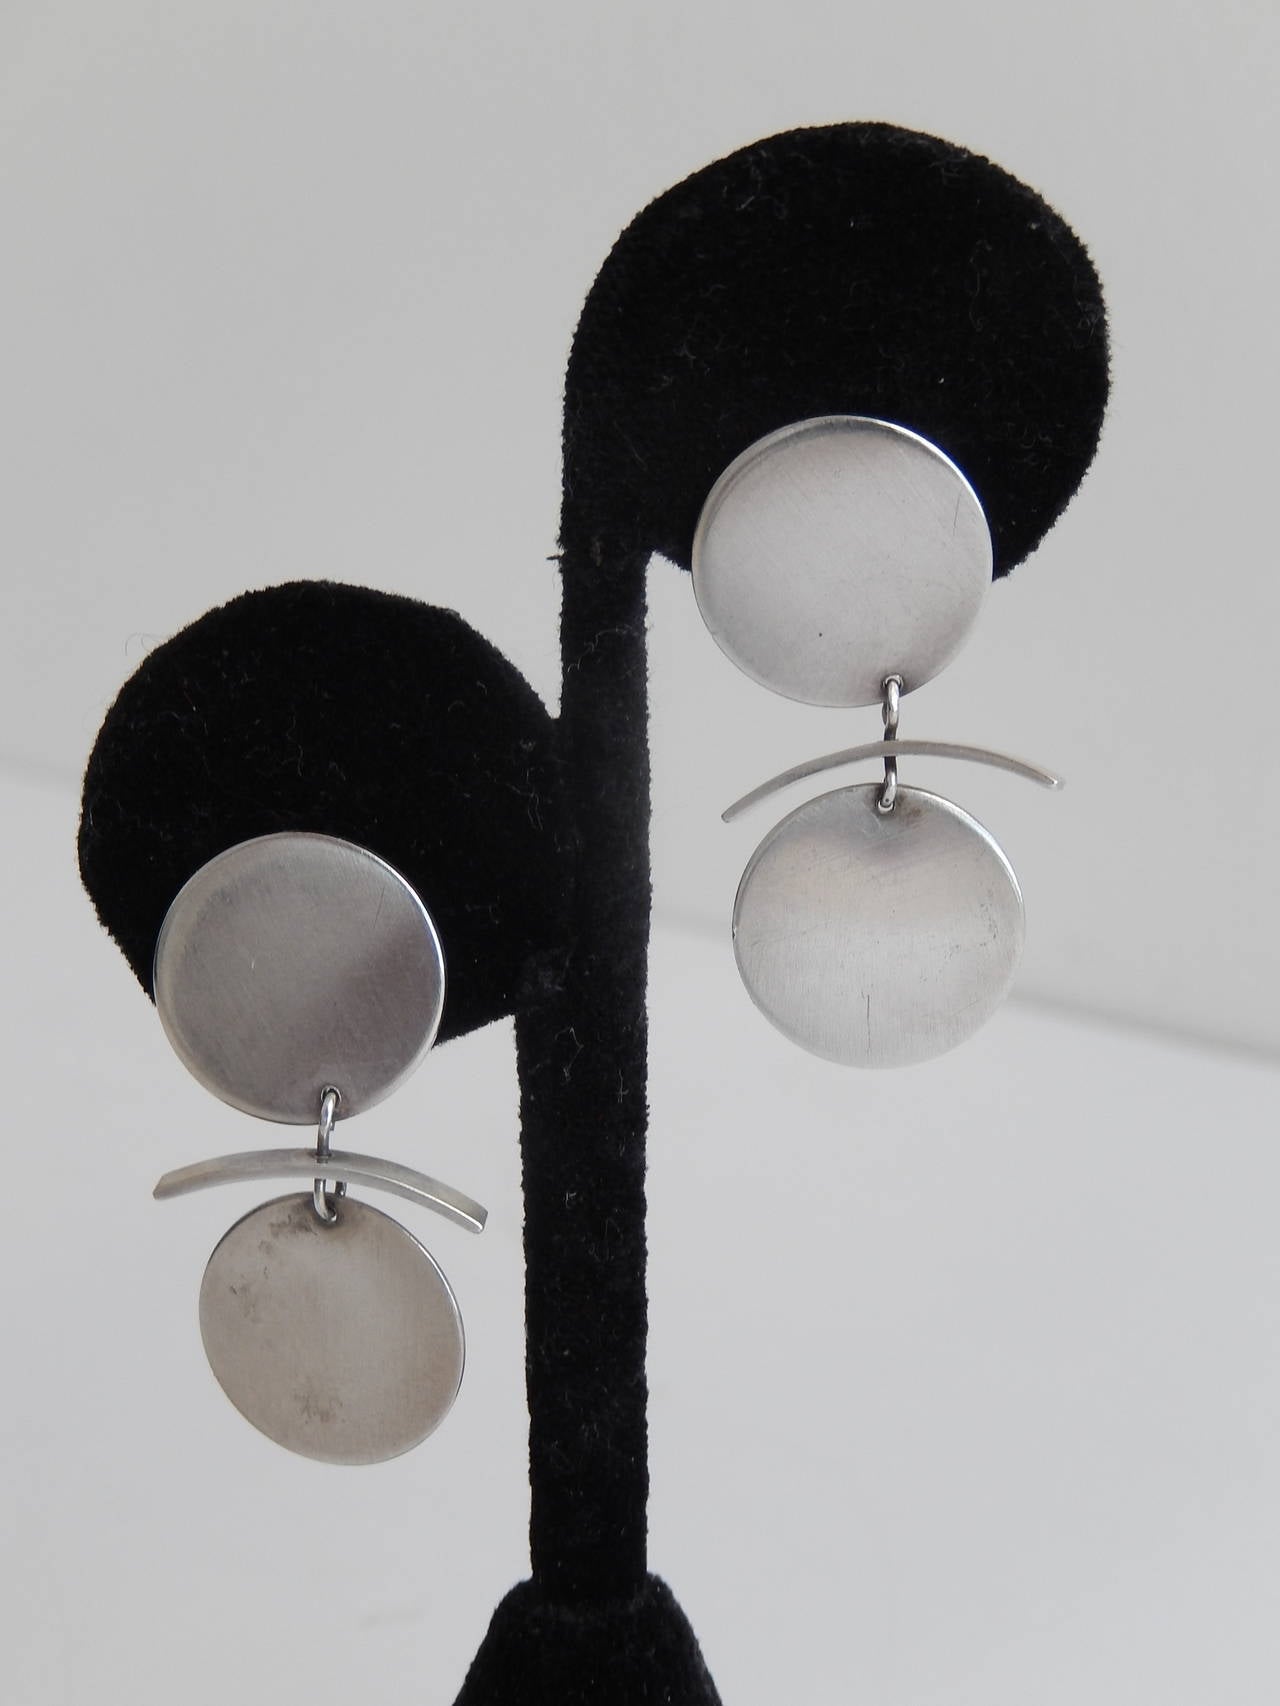 As Toni Greenbaum states in her excellent reference book on American studio jewelry, Messengers of Modernism, 